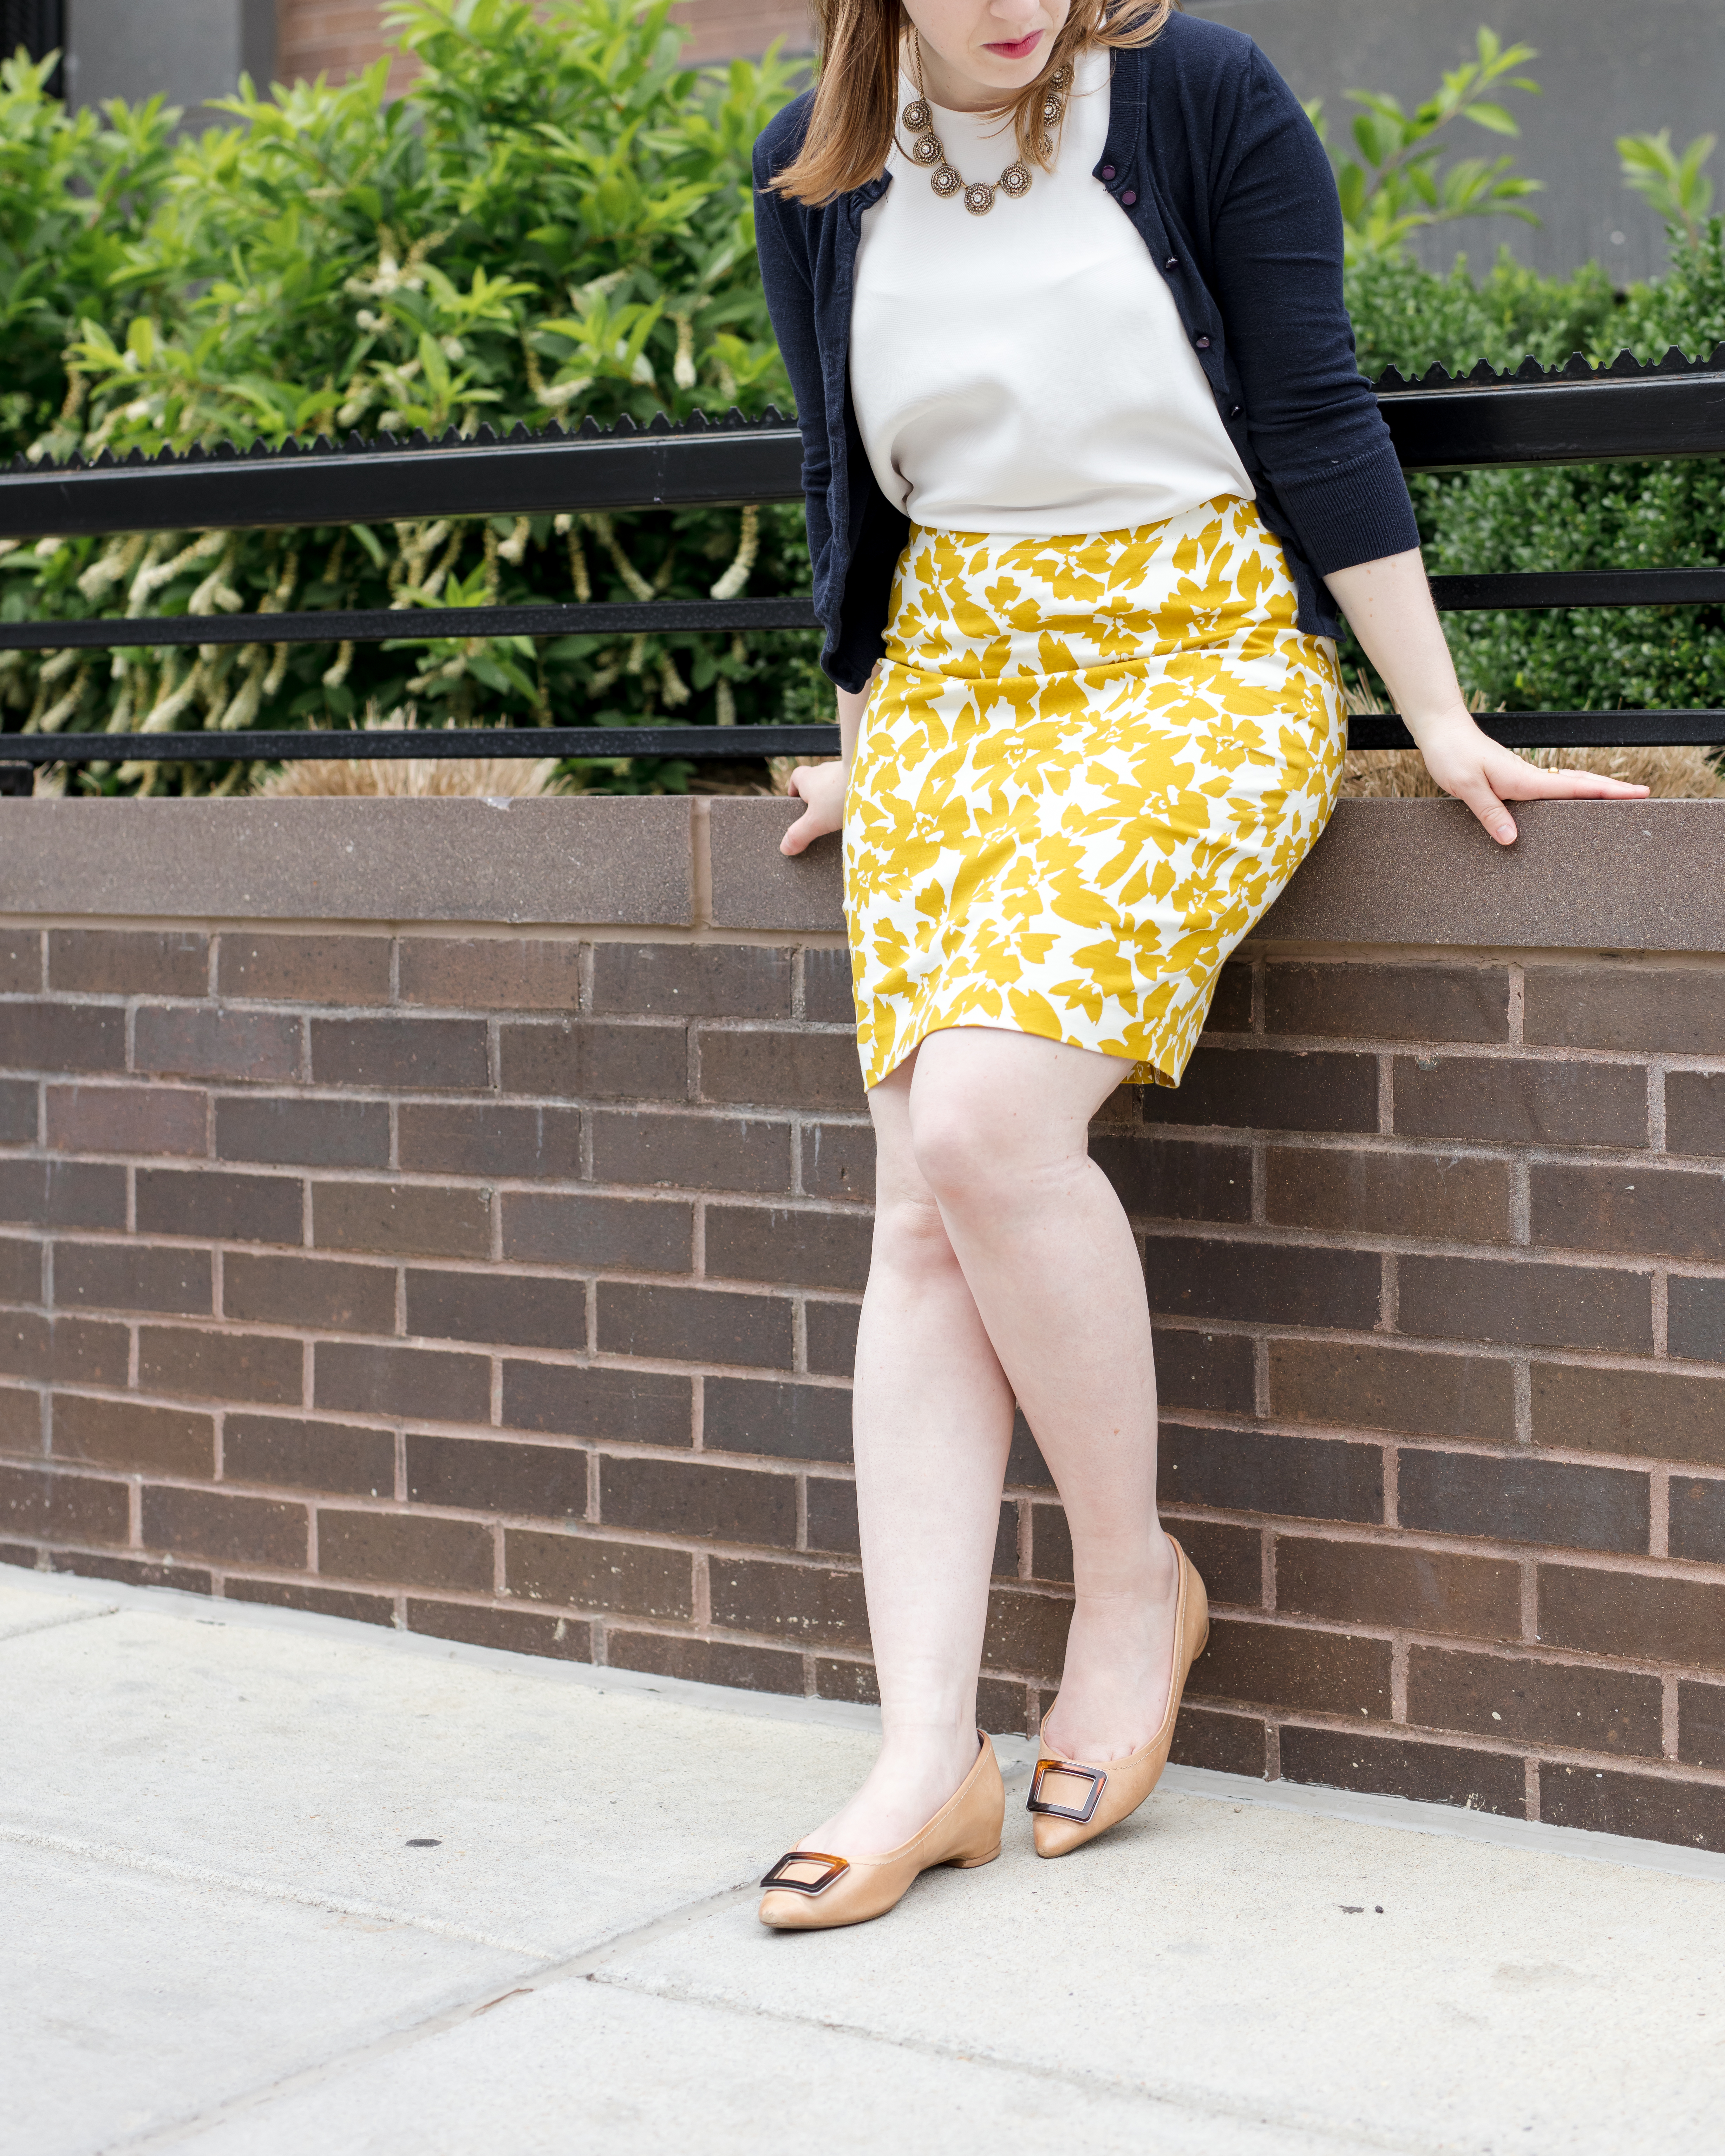 The Floral Pencil Skirt | Something Good, @danaerinw , women, fashion, skirts, work wear, shoes, rockport total motion buckle flats, yellow skirt, white tank